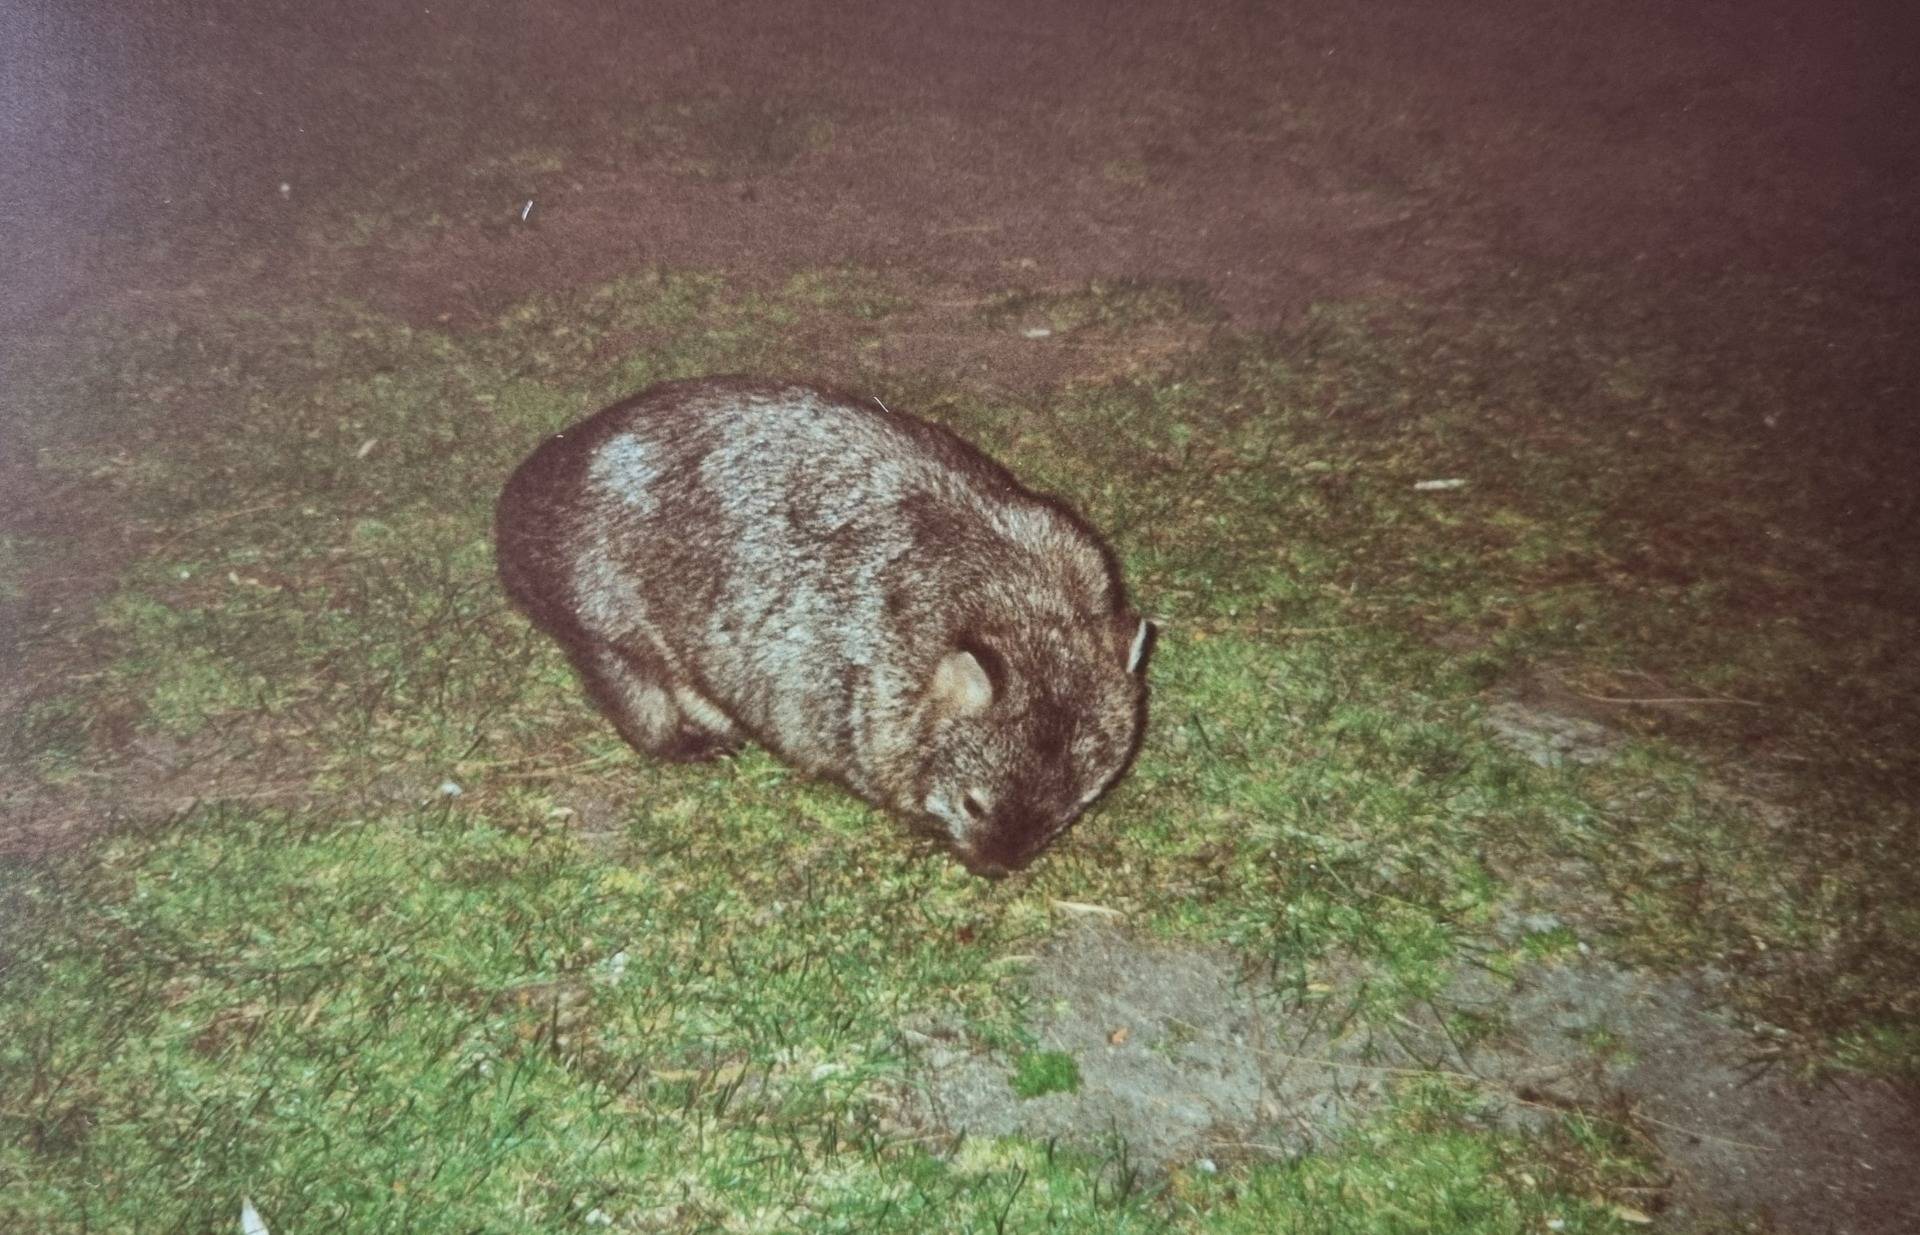 A Wombat just cruising around the camp grounds.